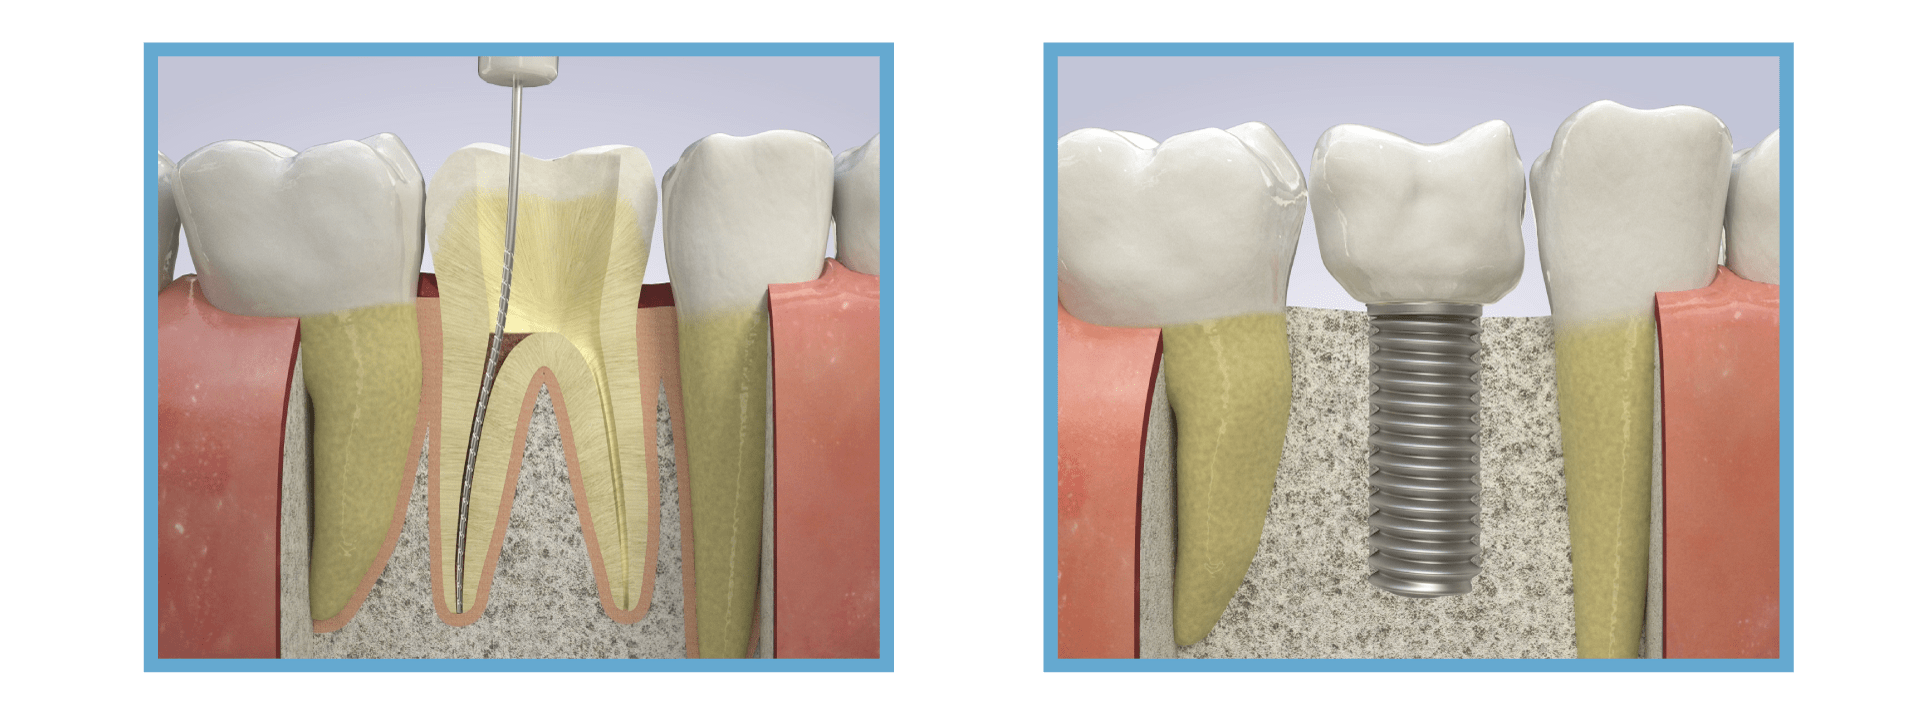 Root Canal vs. Dental Implant Procedure